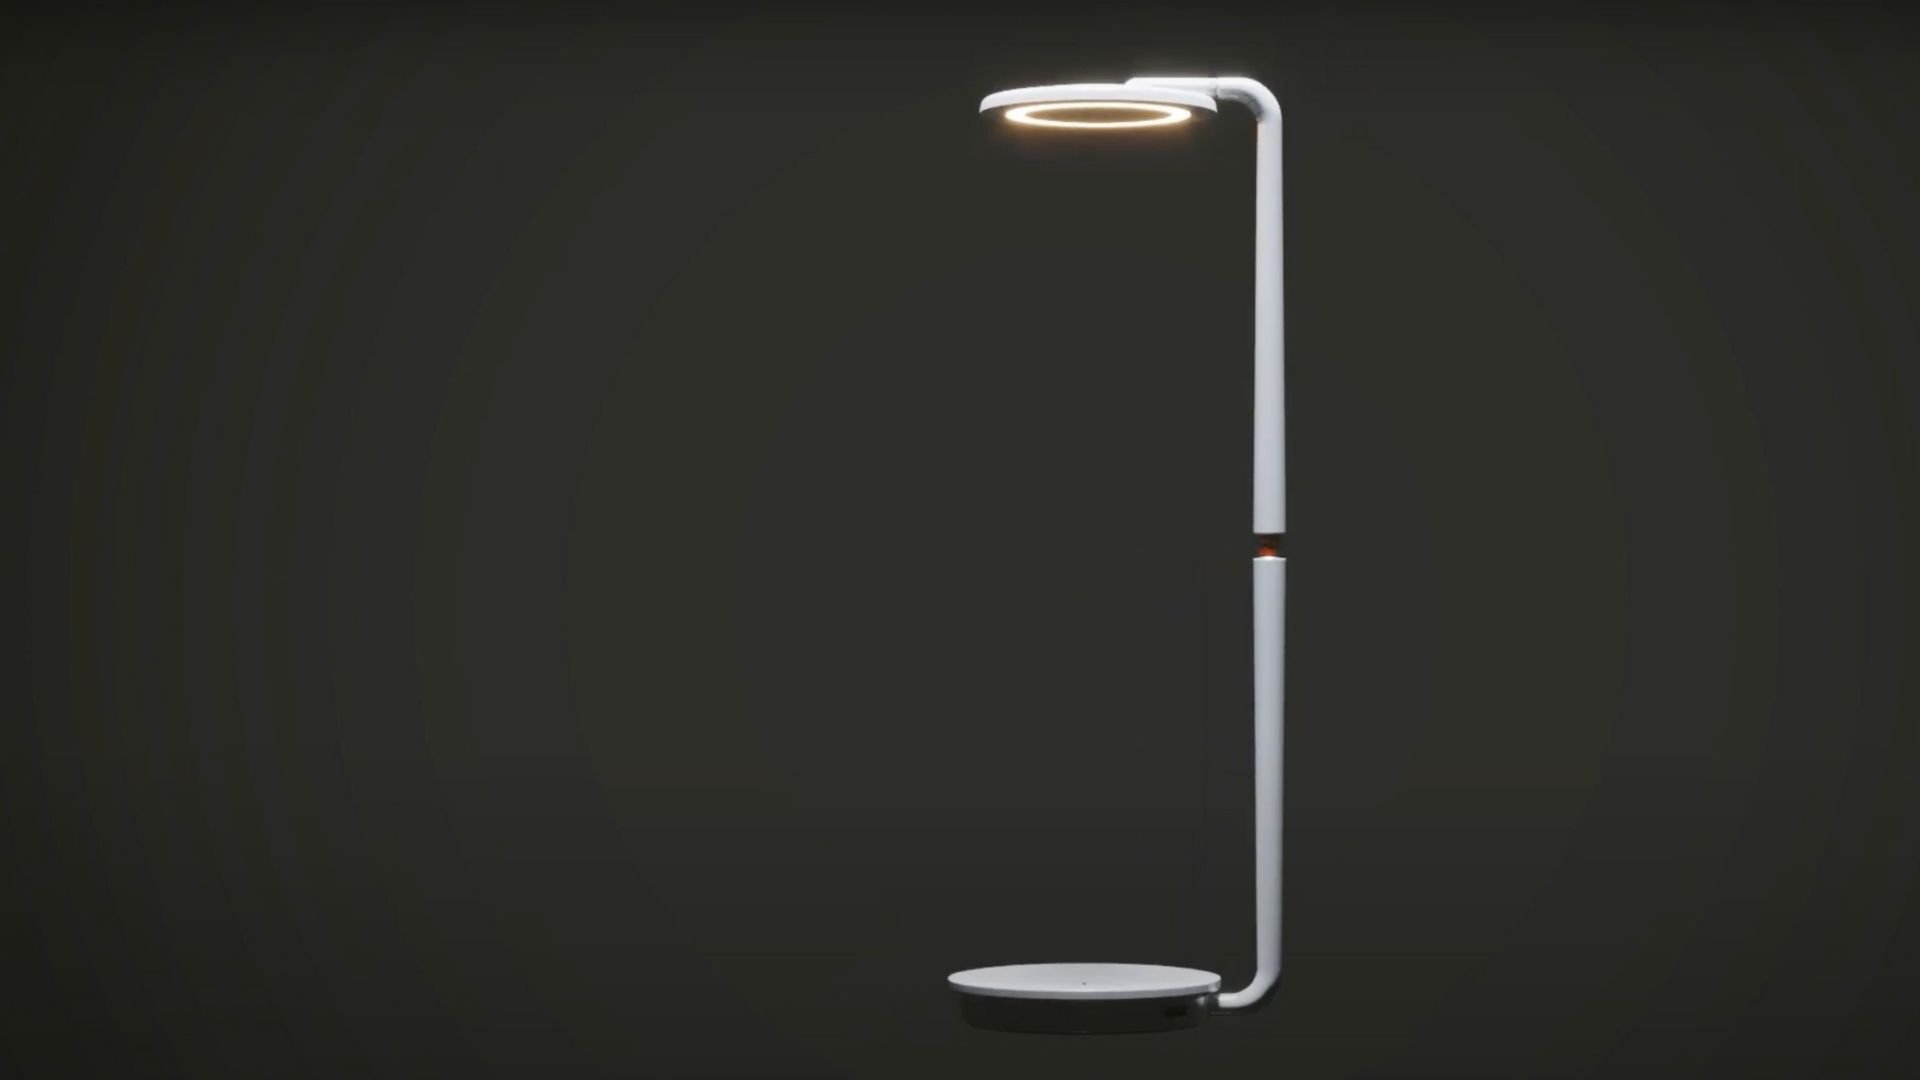 3D Animation for a Lamp: Side Camera Angle